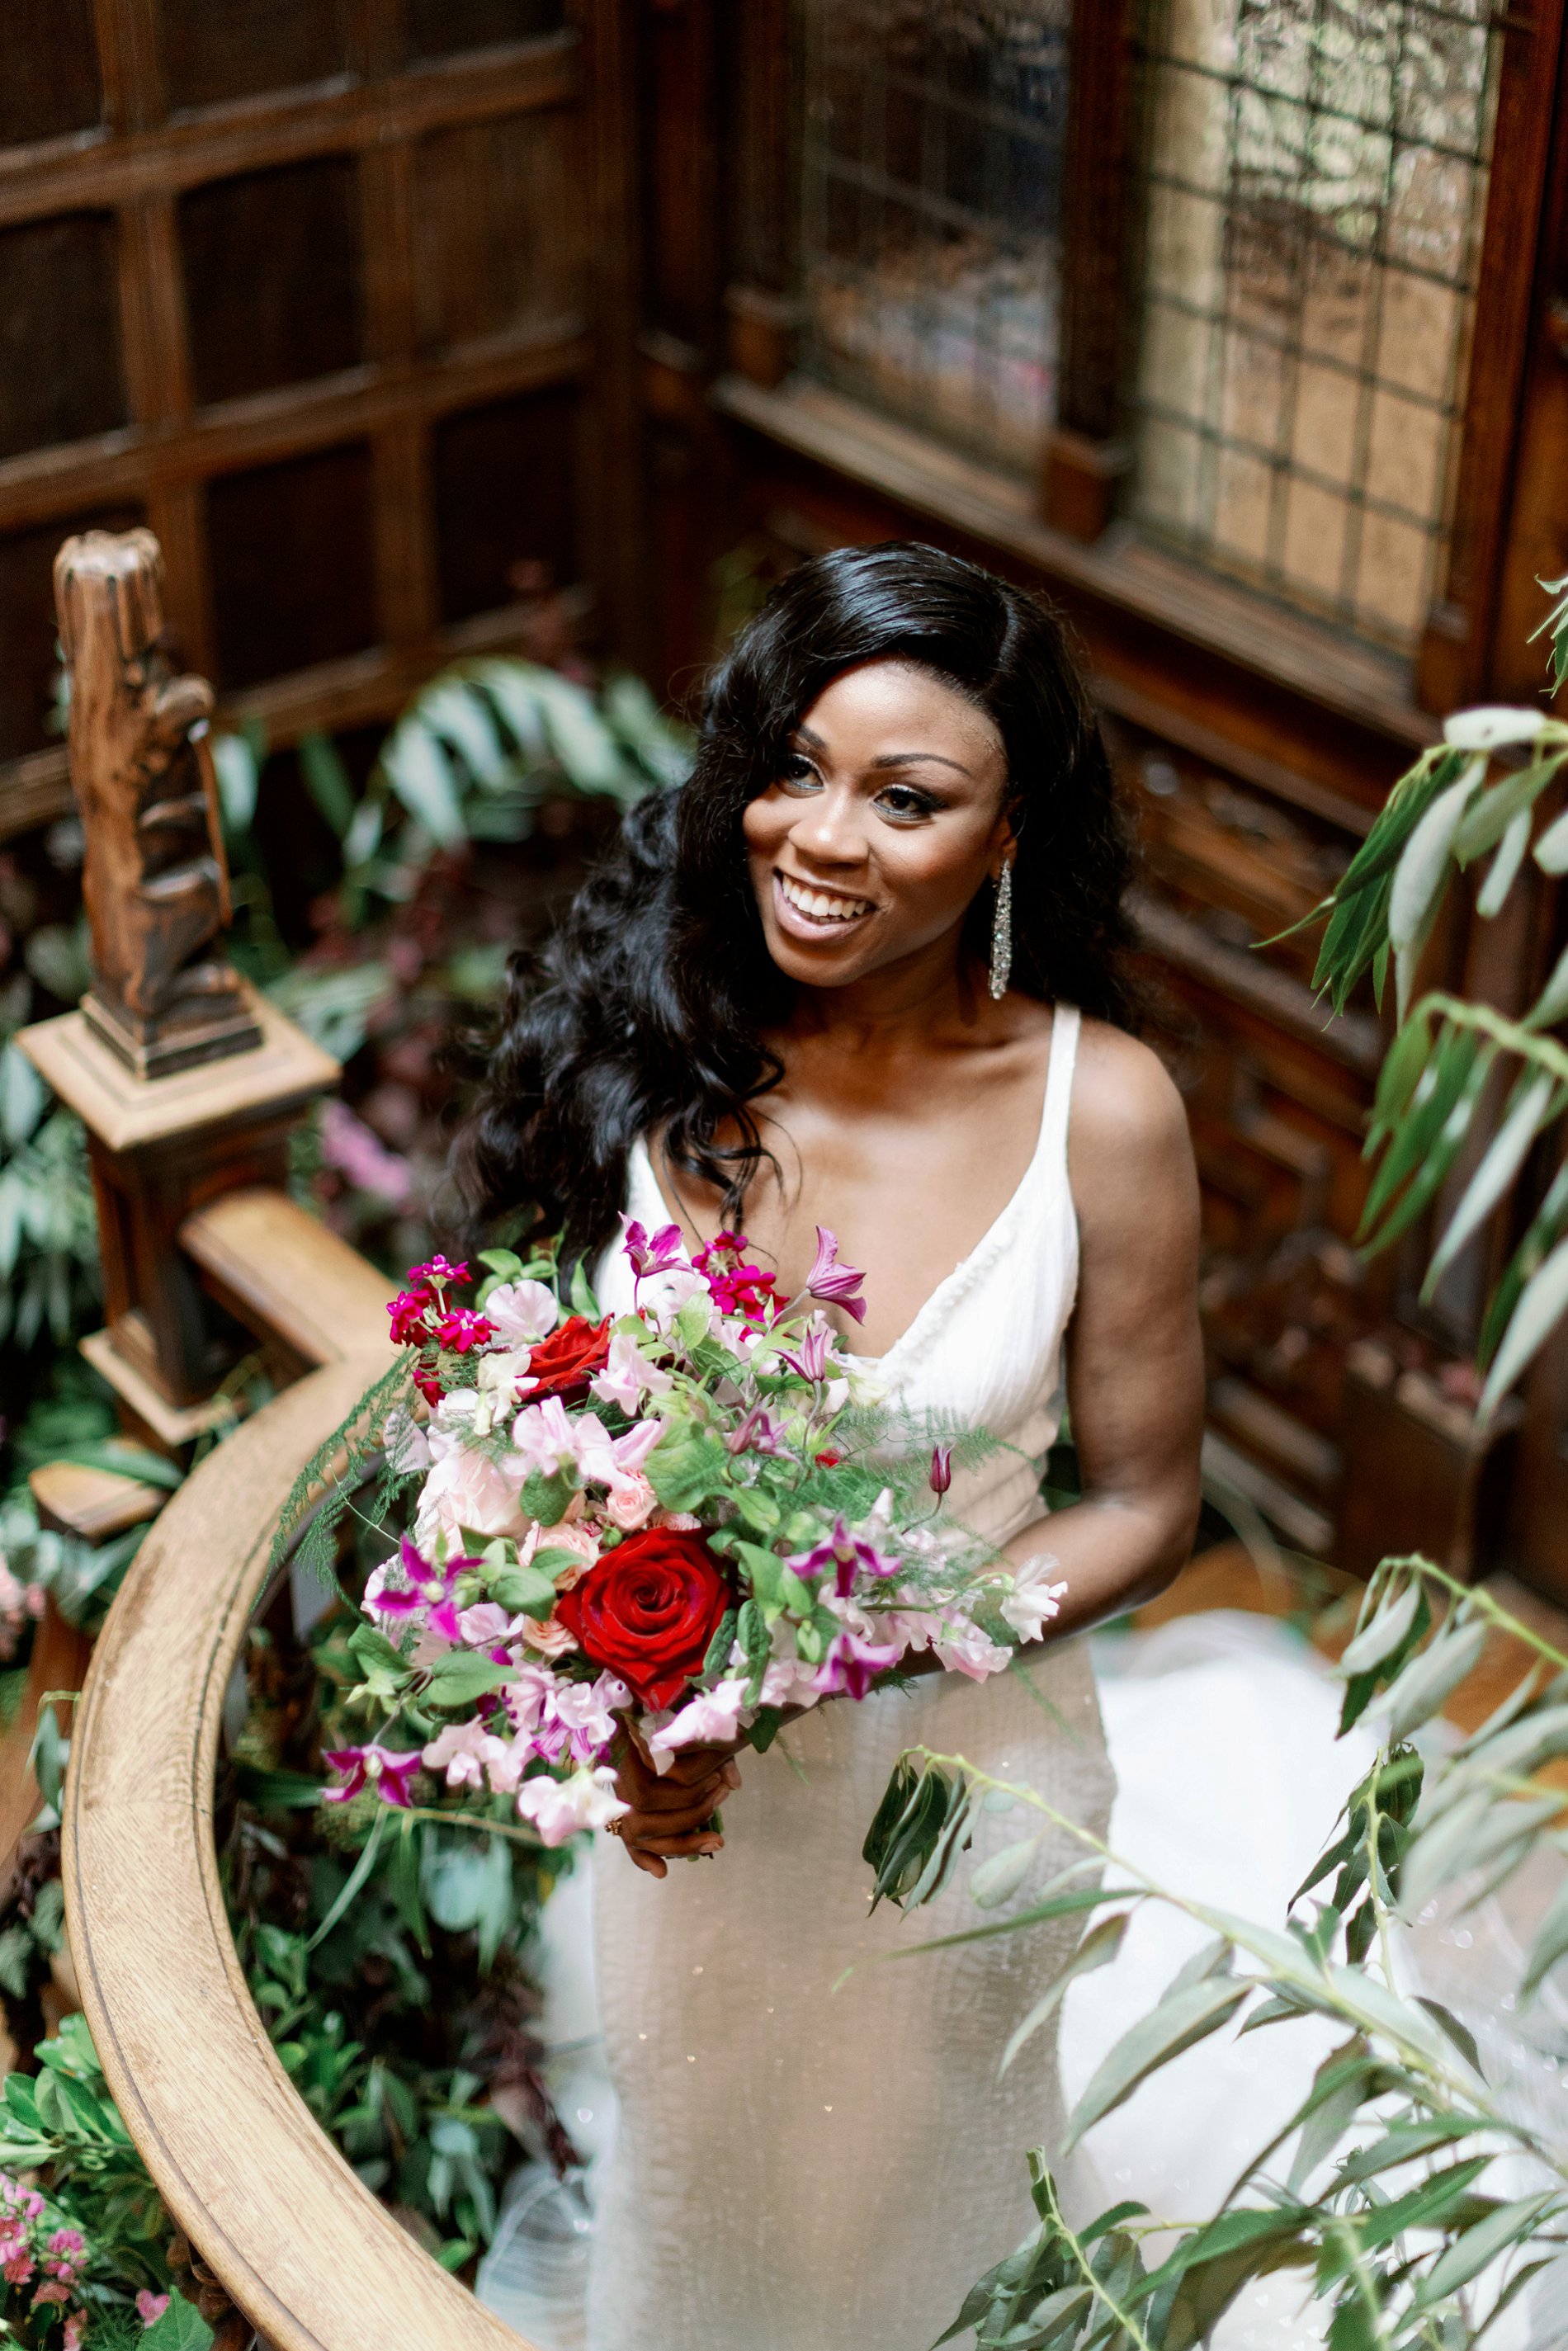 Forever Yours Styled Shoot (c) Camilla J. Hards and Courtney Dee Photography (29)